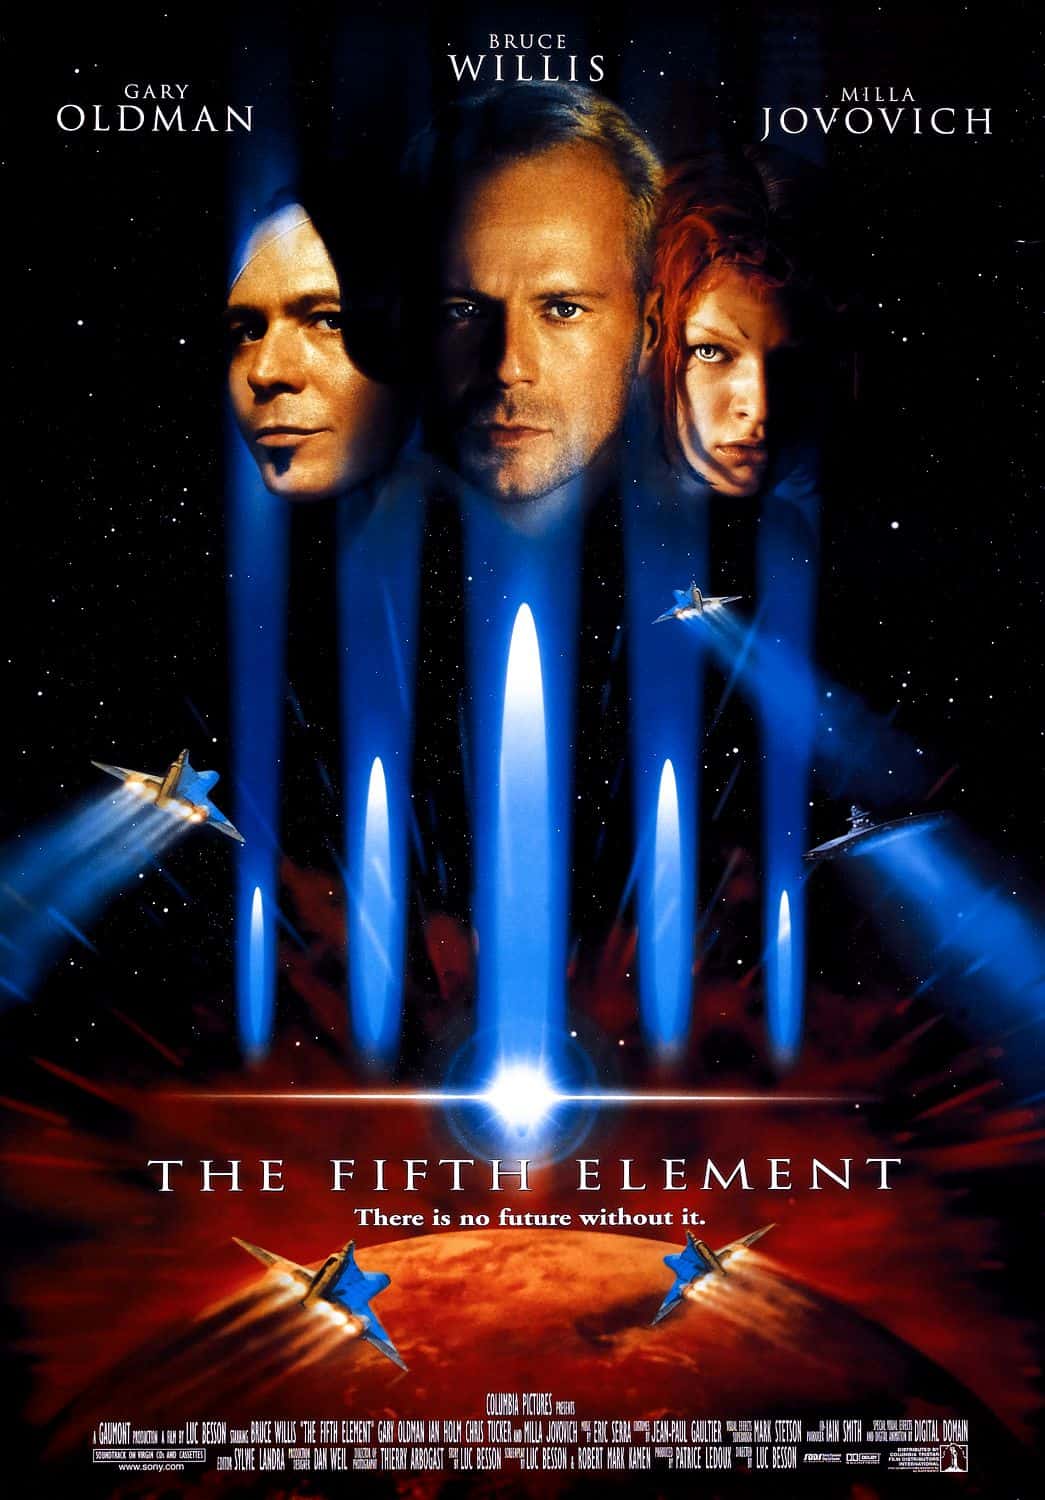 Best End of the World Movies You Can't Miss The Fifth Element (1997)